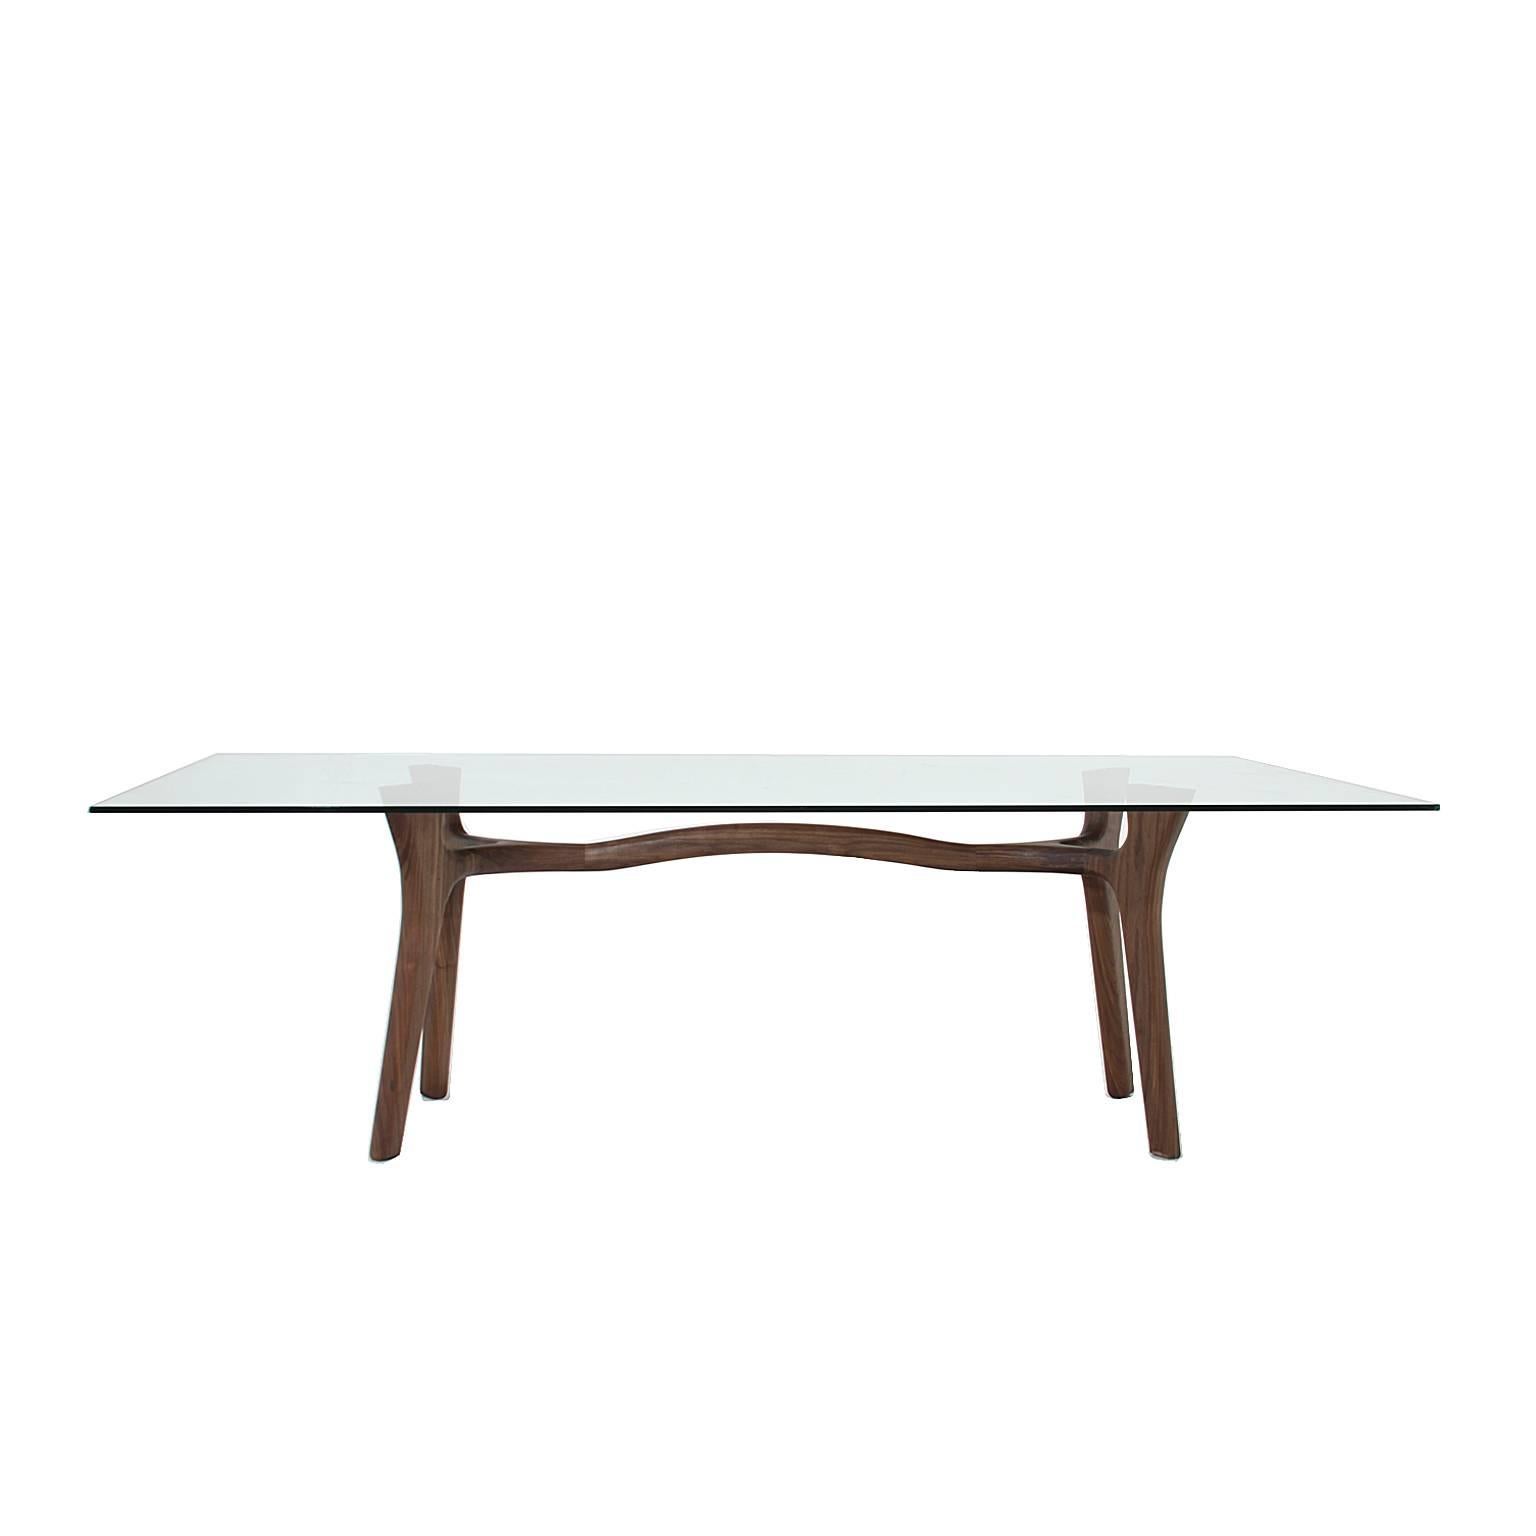 A sculptural solid walnut dining table with an arched center and a floating glass top inspired by the designs of Italian born Giuseppe Scapinelli from Brazil. Glass top width 100